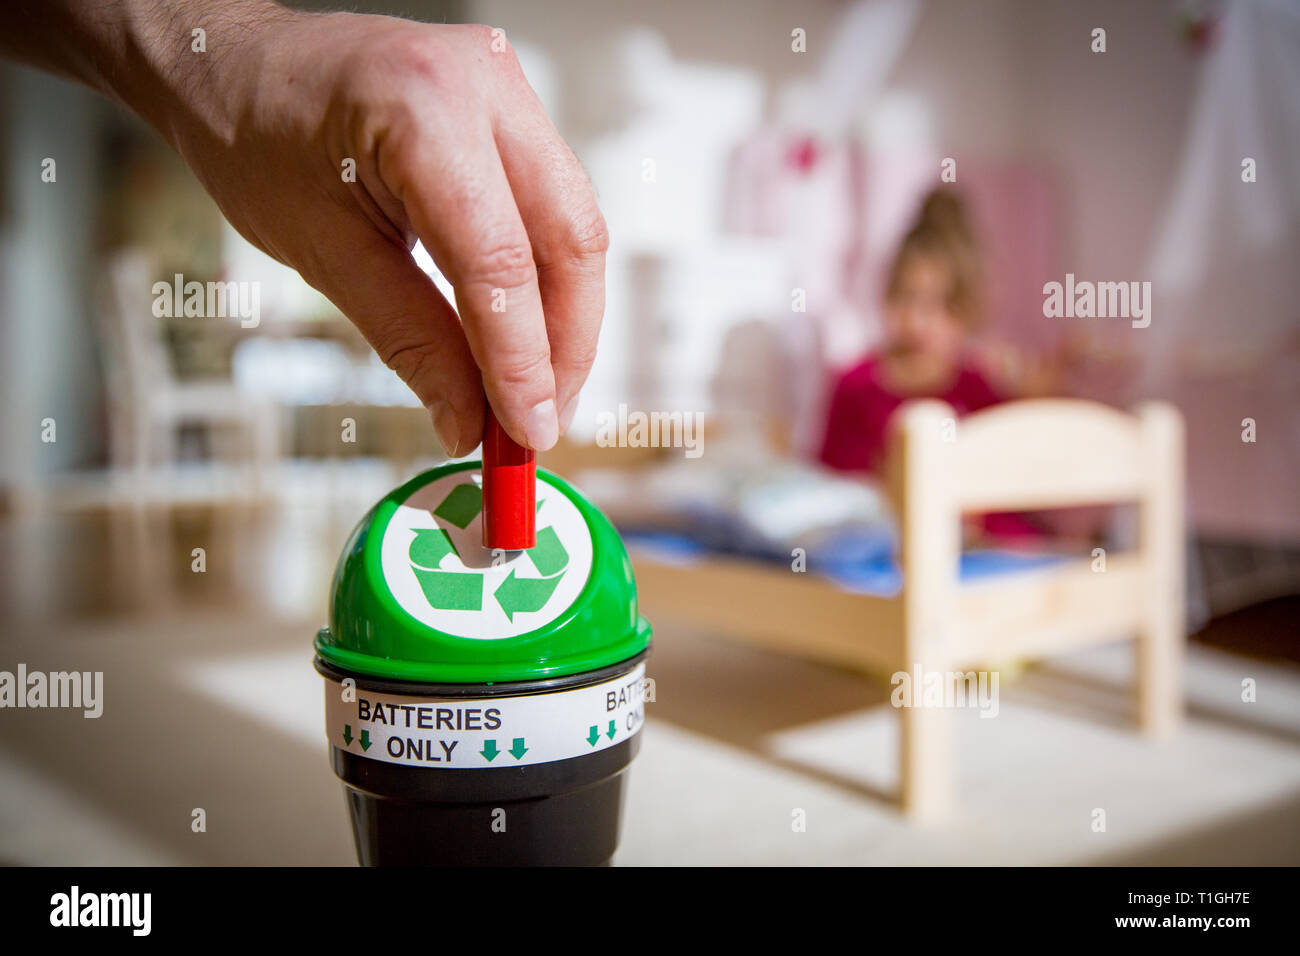 Man putting used batteries into recycling box at home. Child in the nursery room playing with toys. Separating waste concept. Batteries Only. Stock Photo